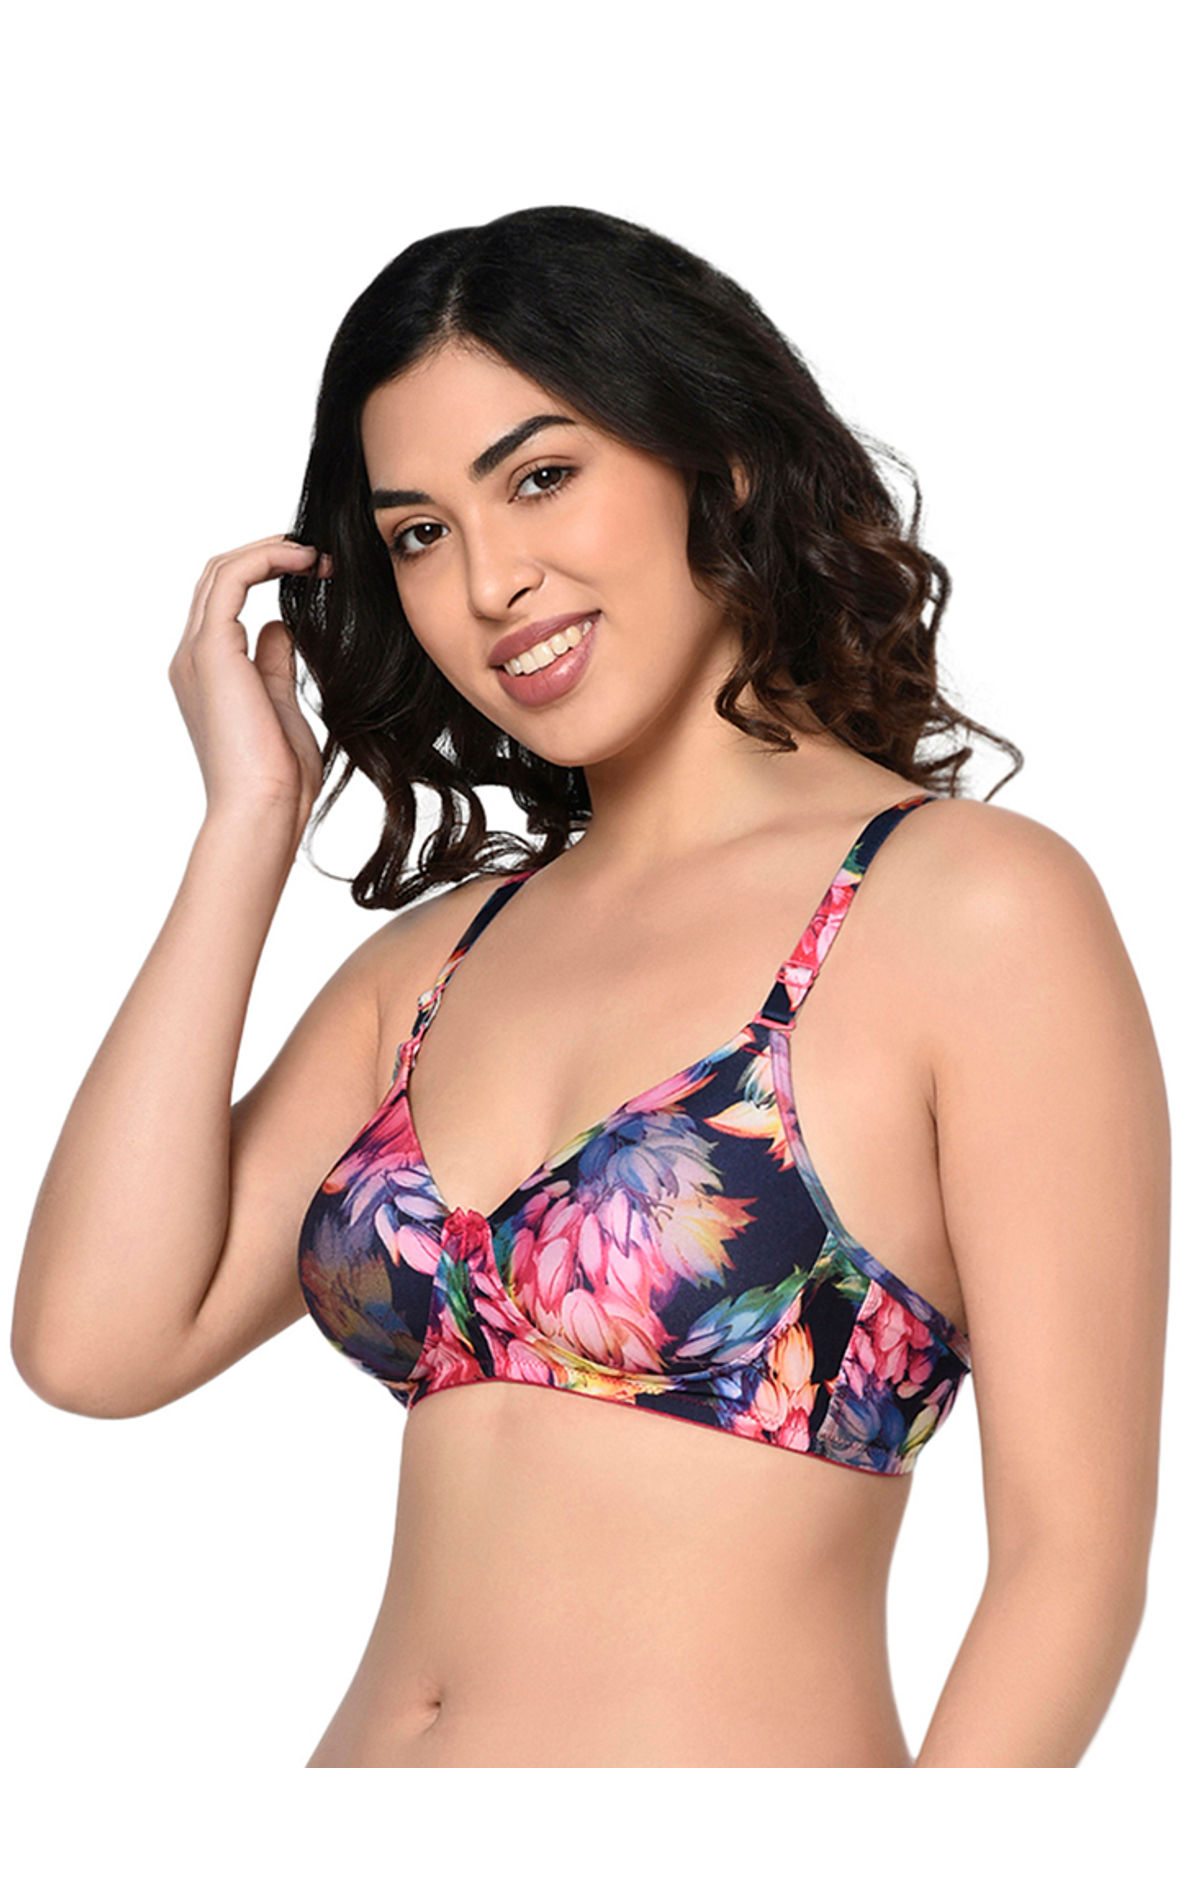 Bodycare Printed Non Padded, Assorted Bra-1571